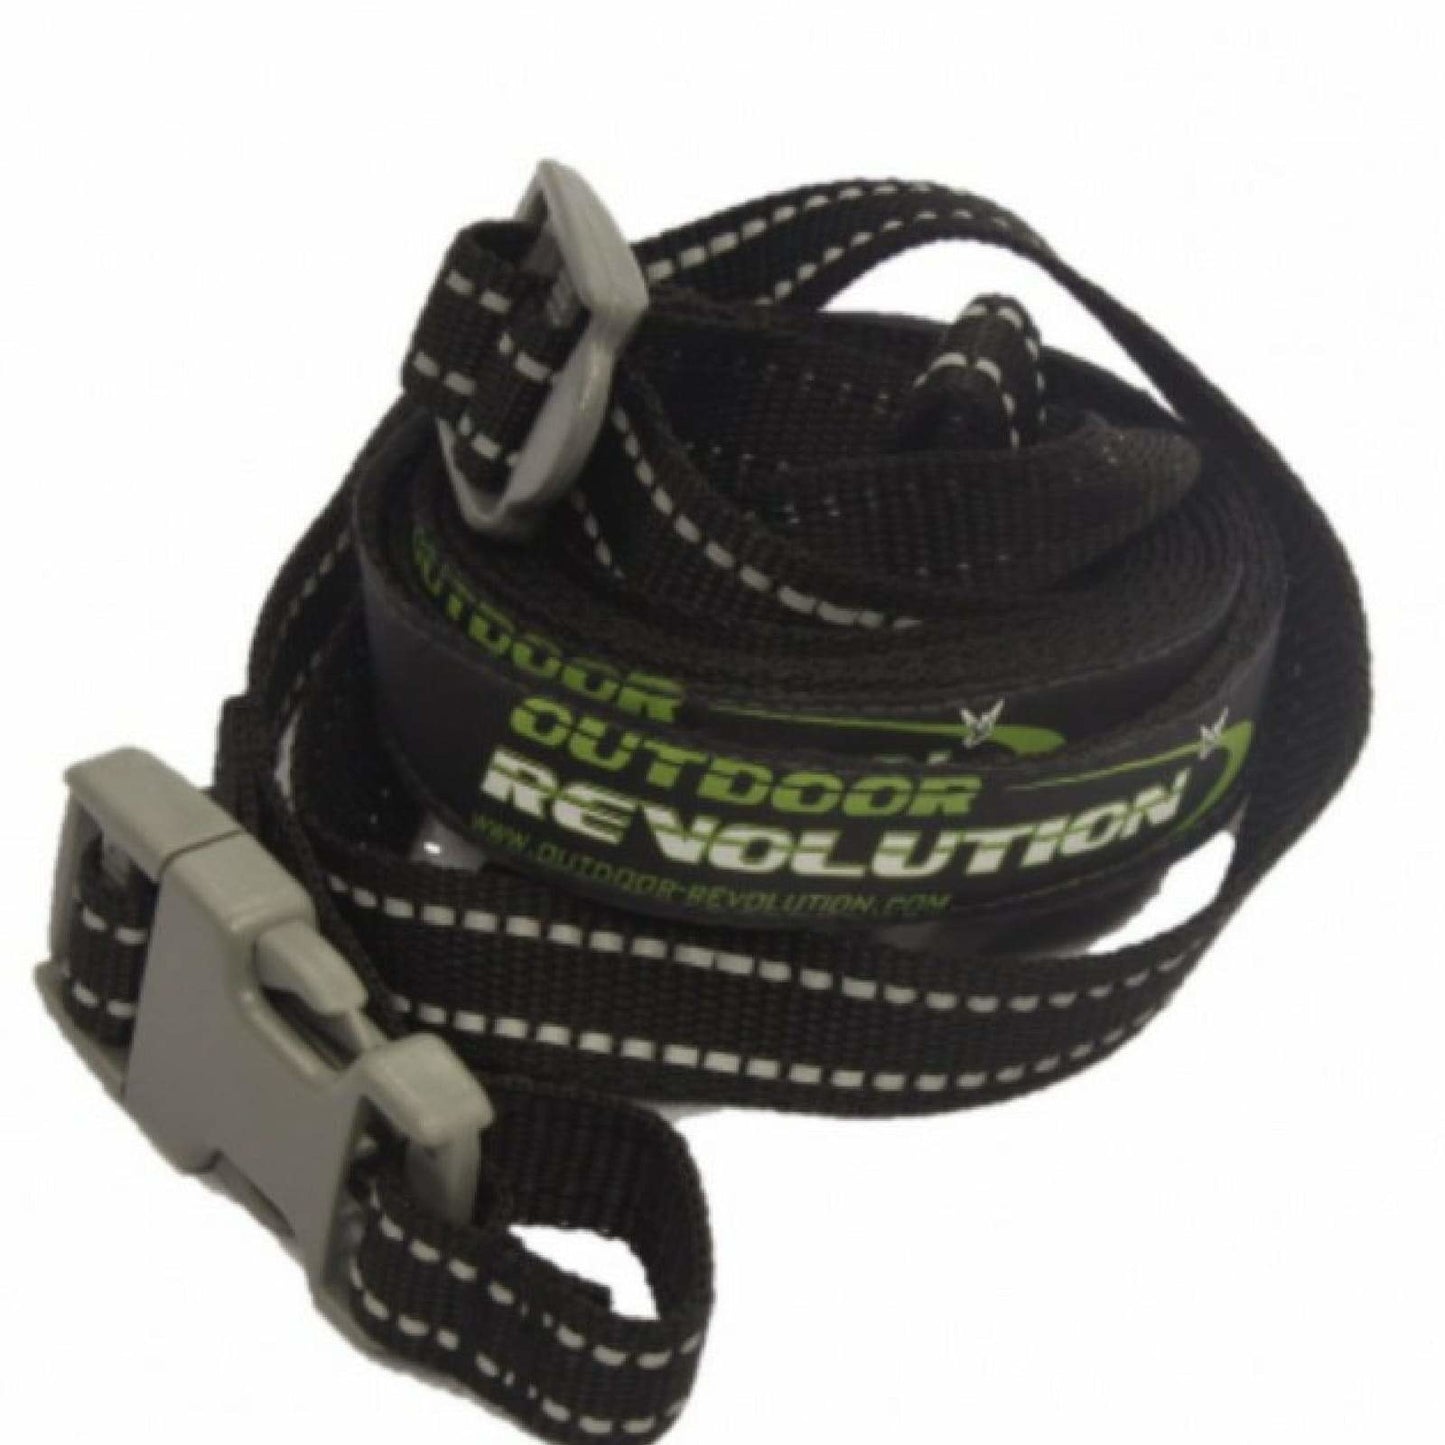 Outdoor Revolution New Reflective Storm Strap (Pair) OR15615 (2019) made by Outdoor Revolution. A Accessories sold by Quality Caravan Awnings